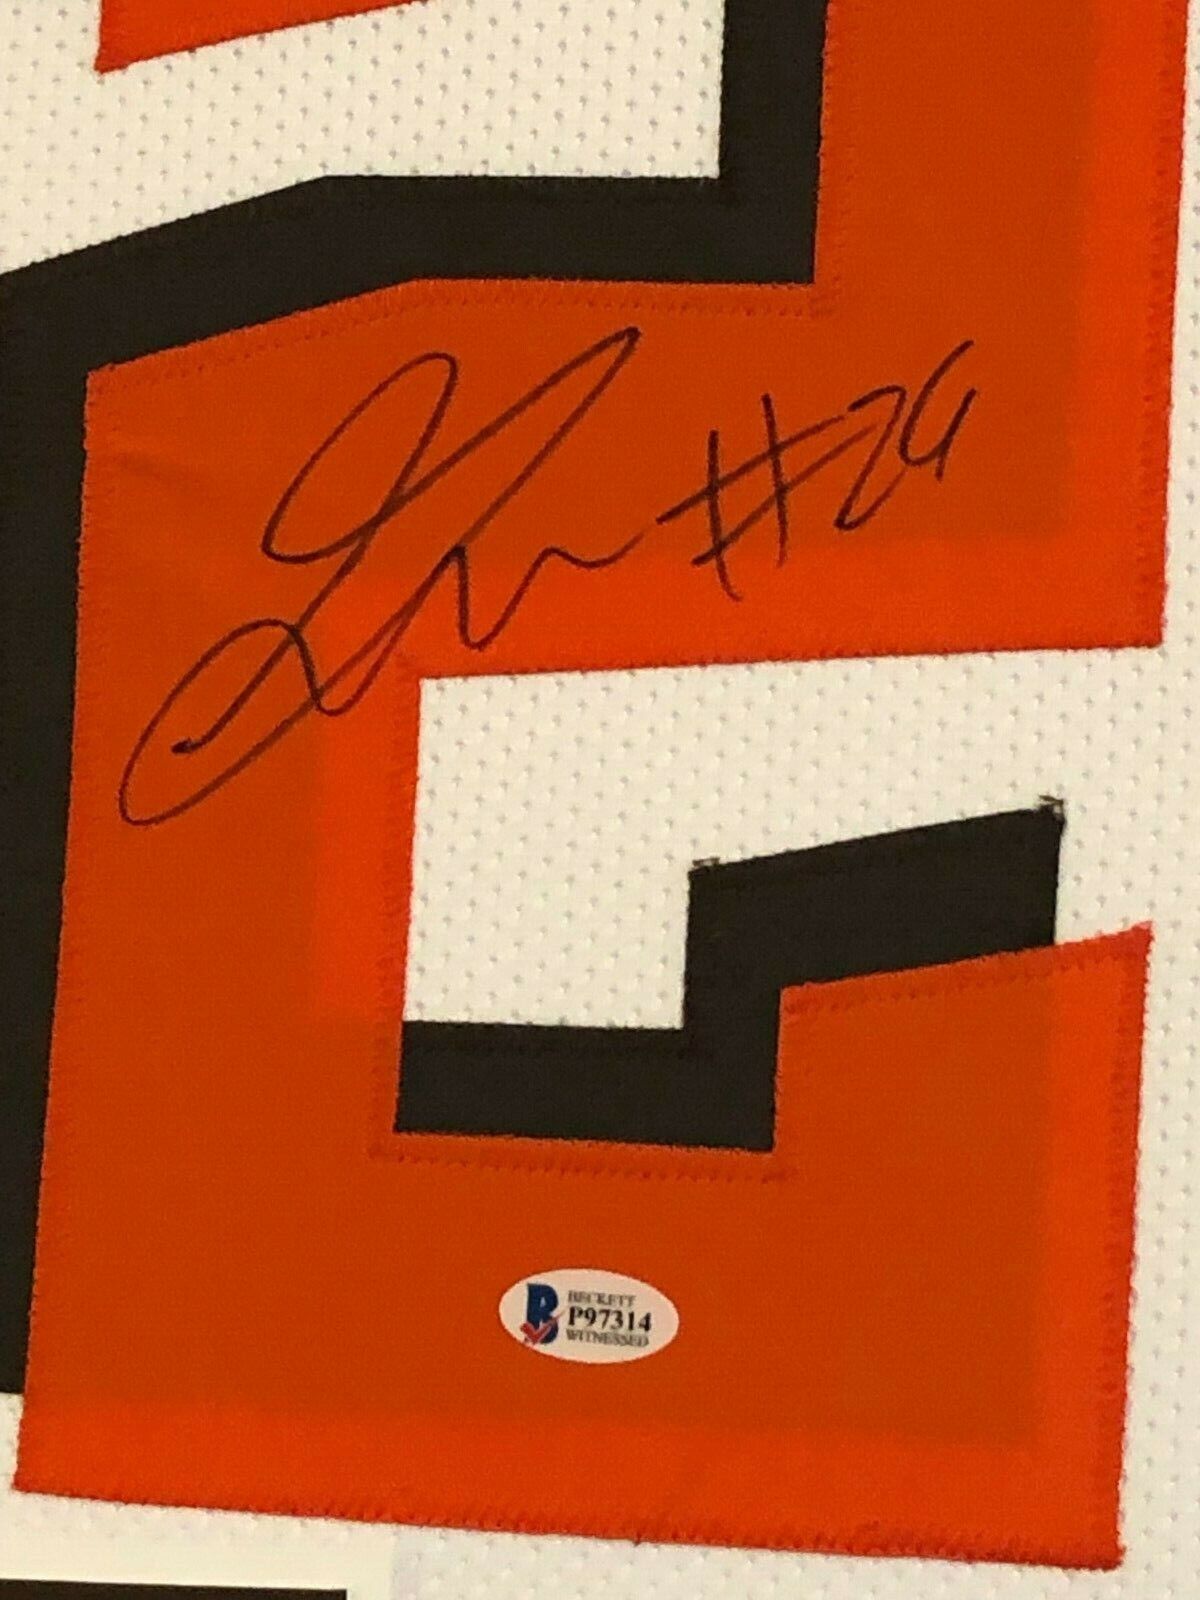 MVP Authentics Framed Cleveland Browns Greedy Williams Autographed Signed Jersey Beckett Coa 449.10 sports jersey framing , jersey framing